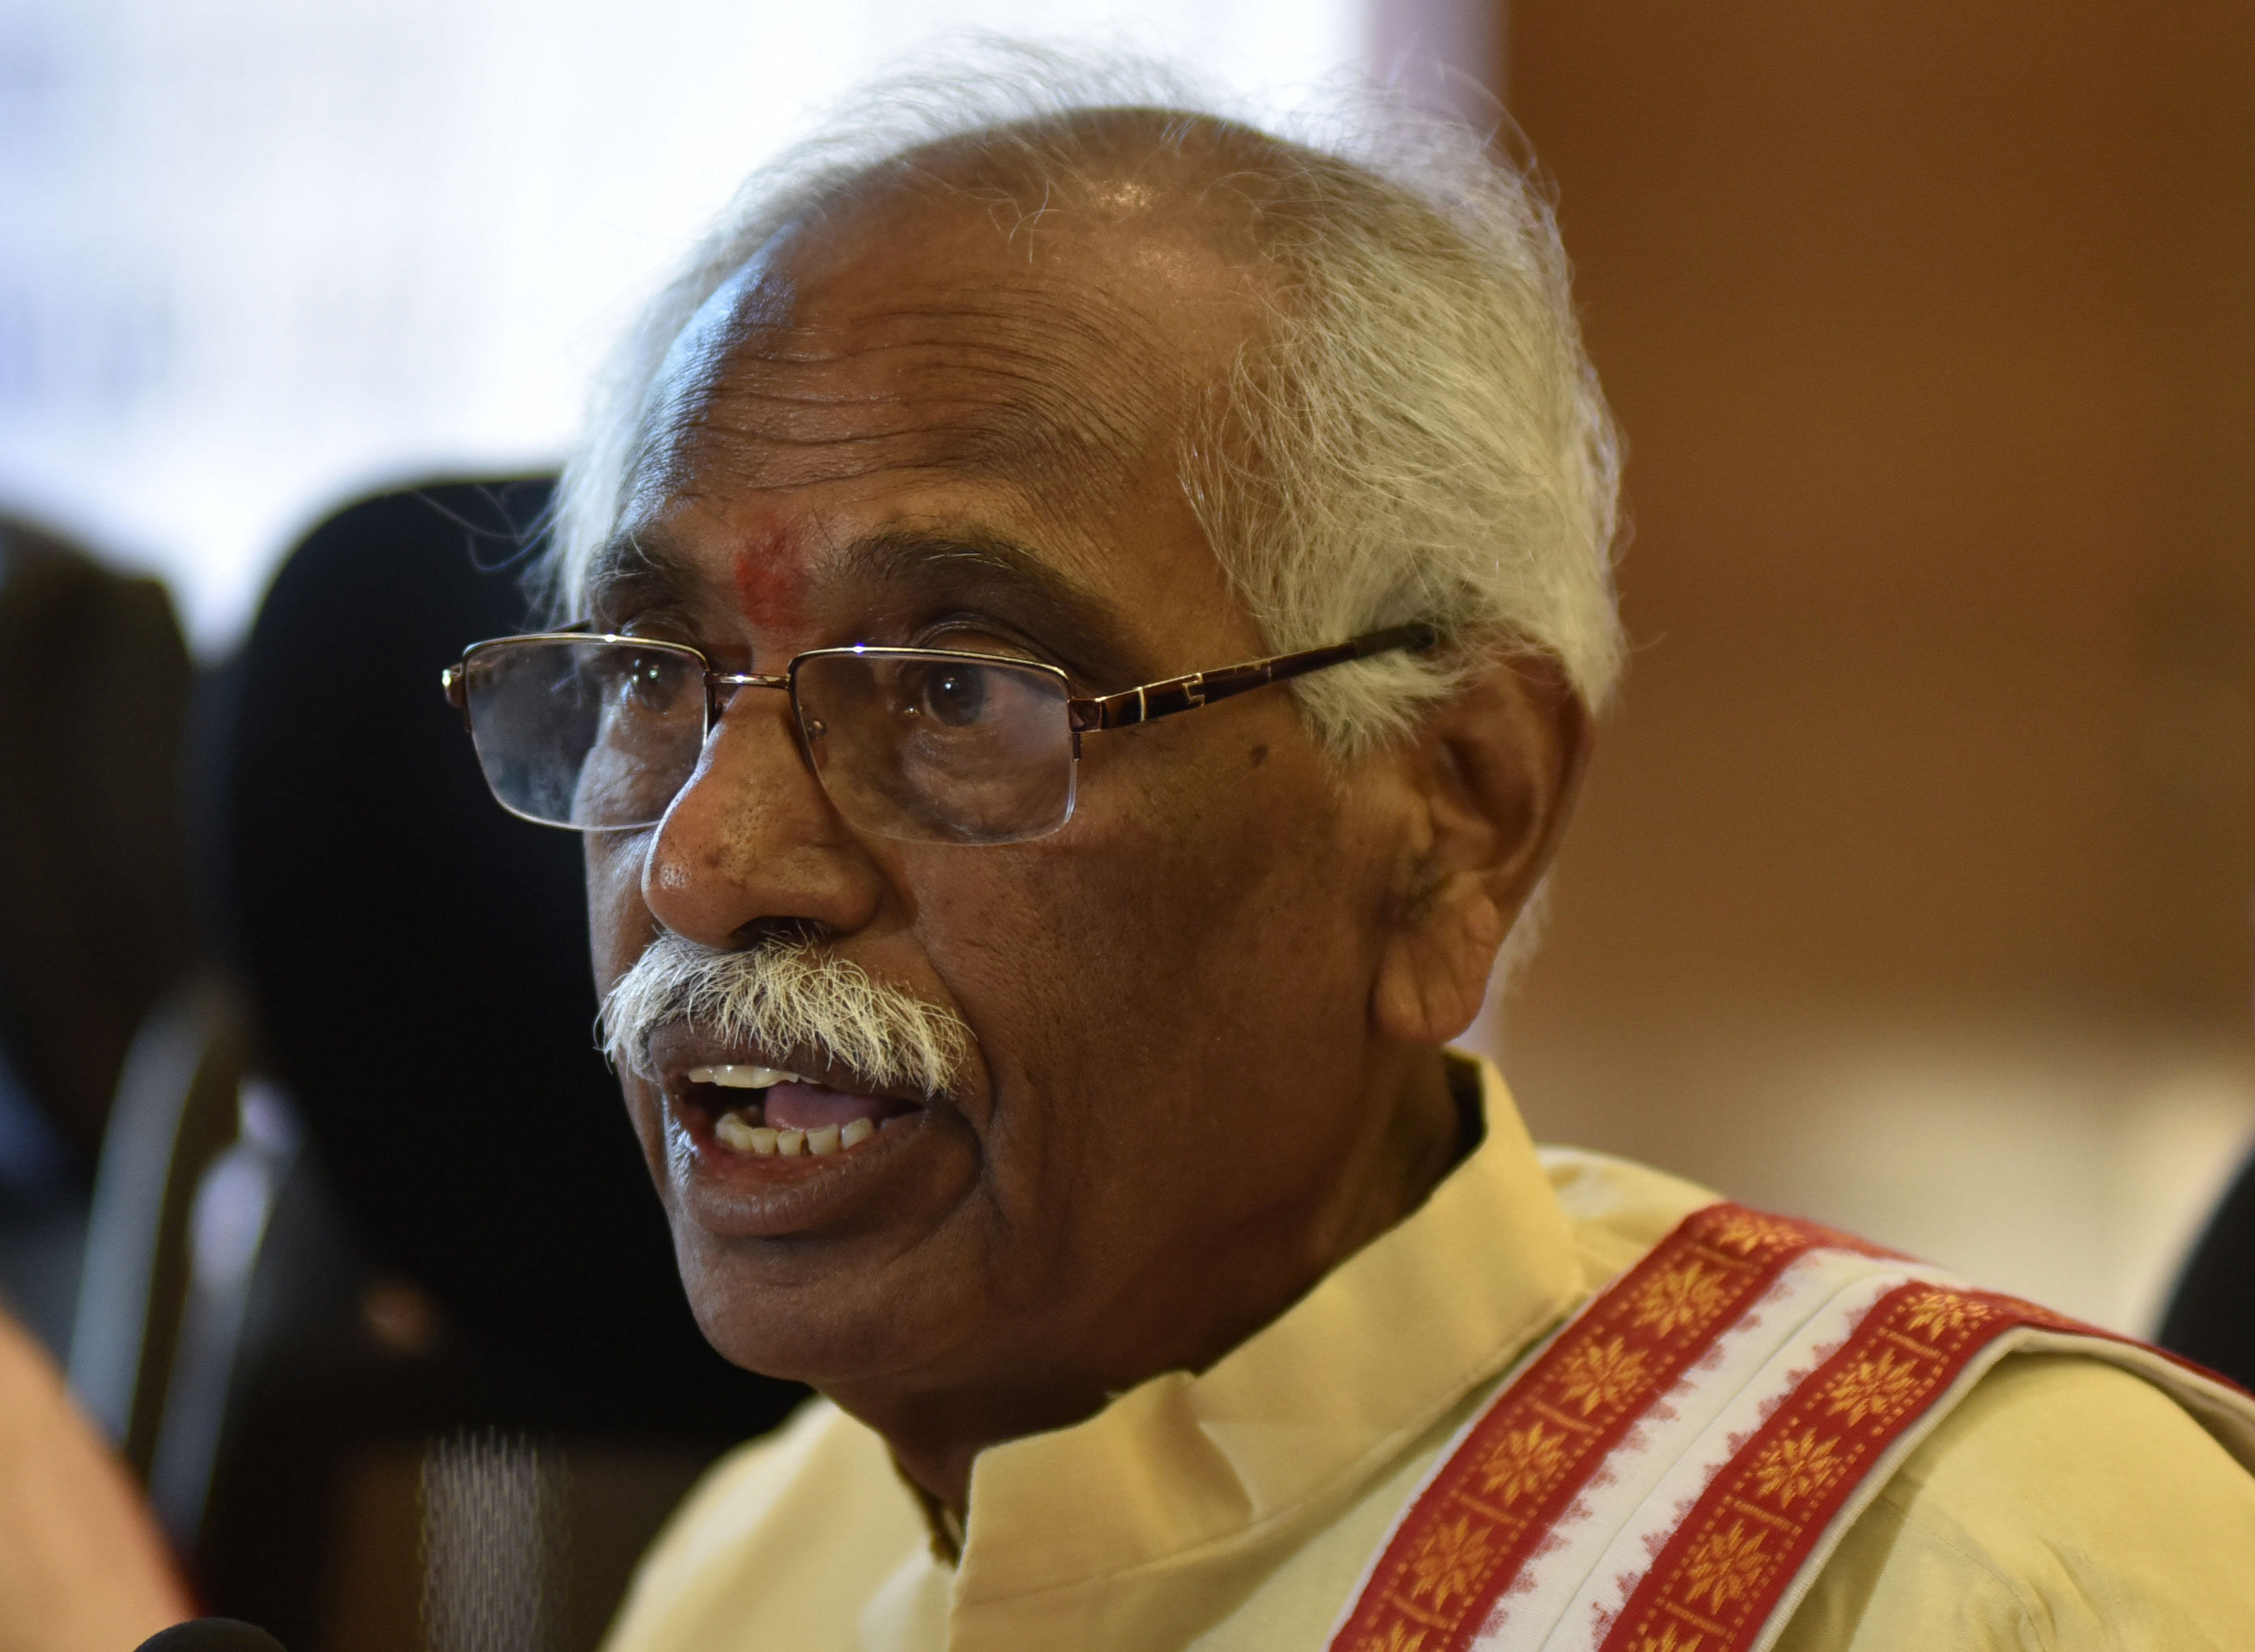 "The BJP will independently contest in all the 17 Lok Sabha seats. The Assembly election was a totally different scenario. This is a parliamentary election and we are confident," Dattatreya, the lone BJP MP from Telangana, told reporters. (DH File Photo)